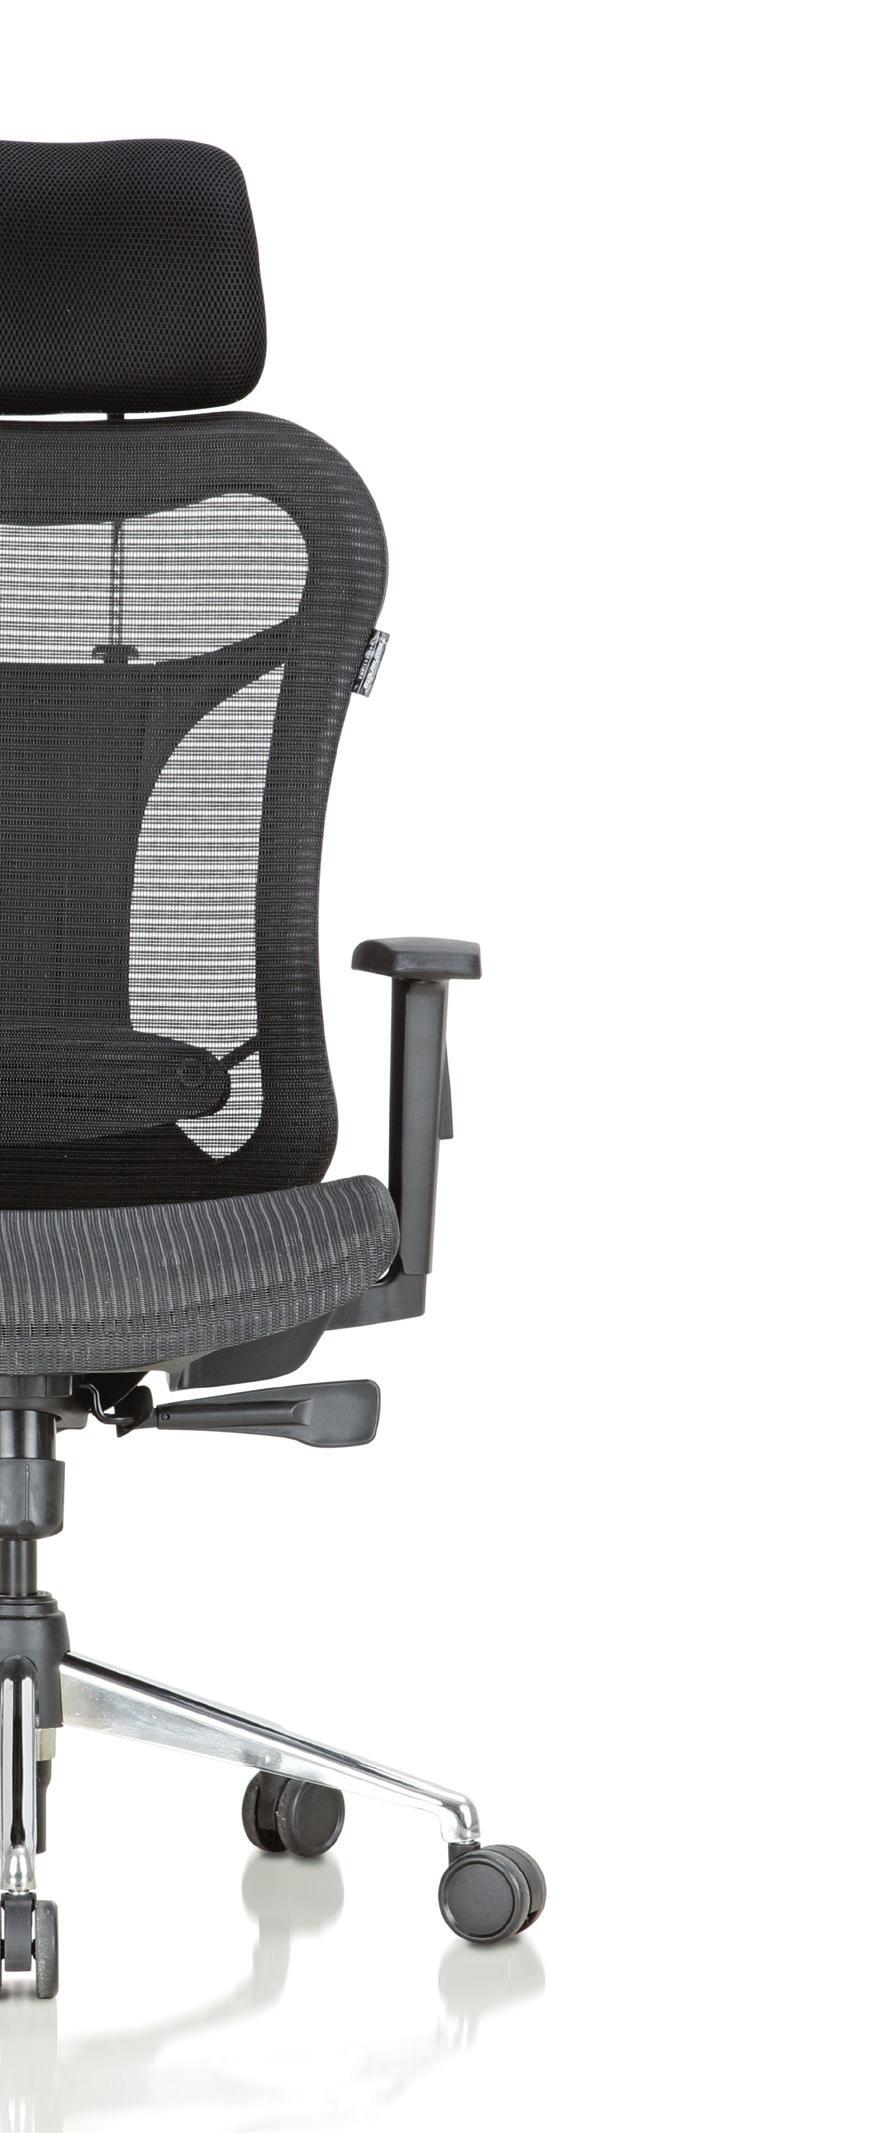 Optima mesh is a chair ready to adapt to anyone, anywhere, accommodating